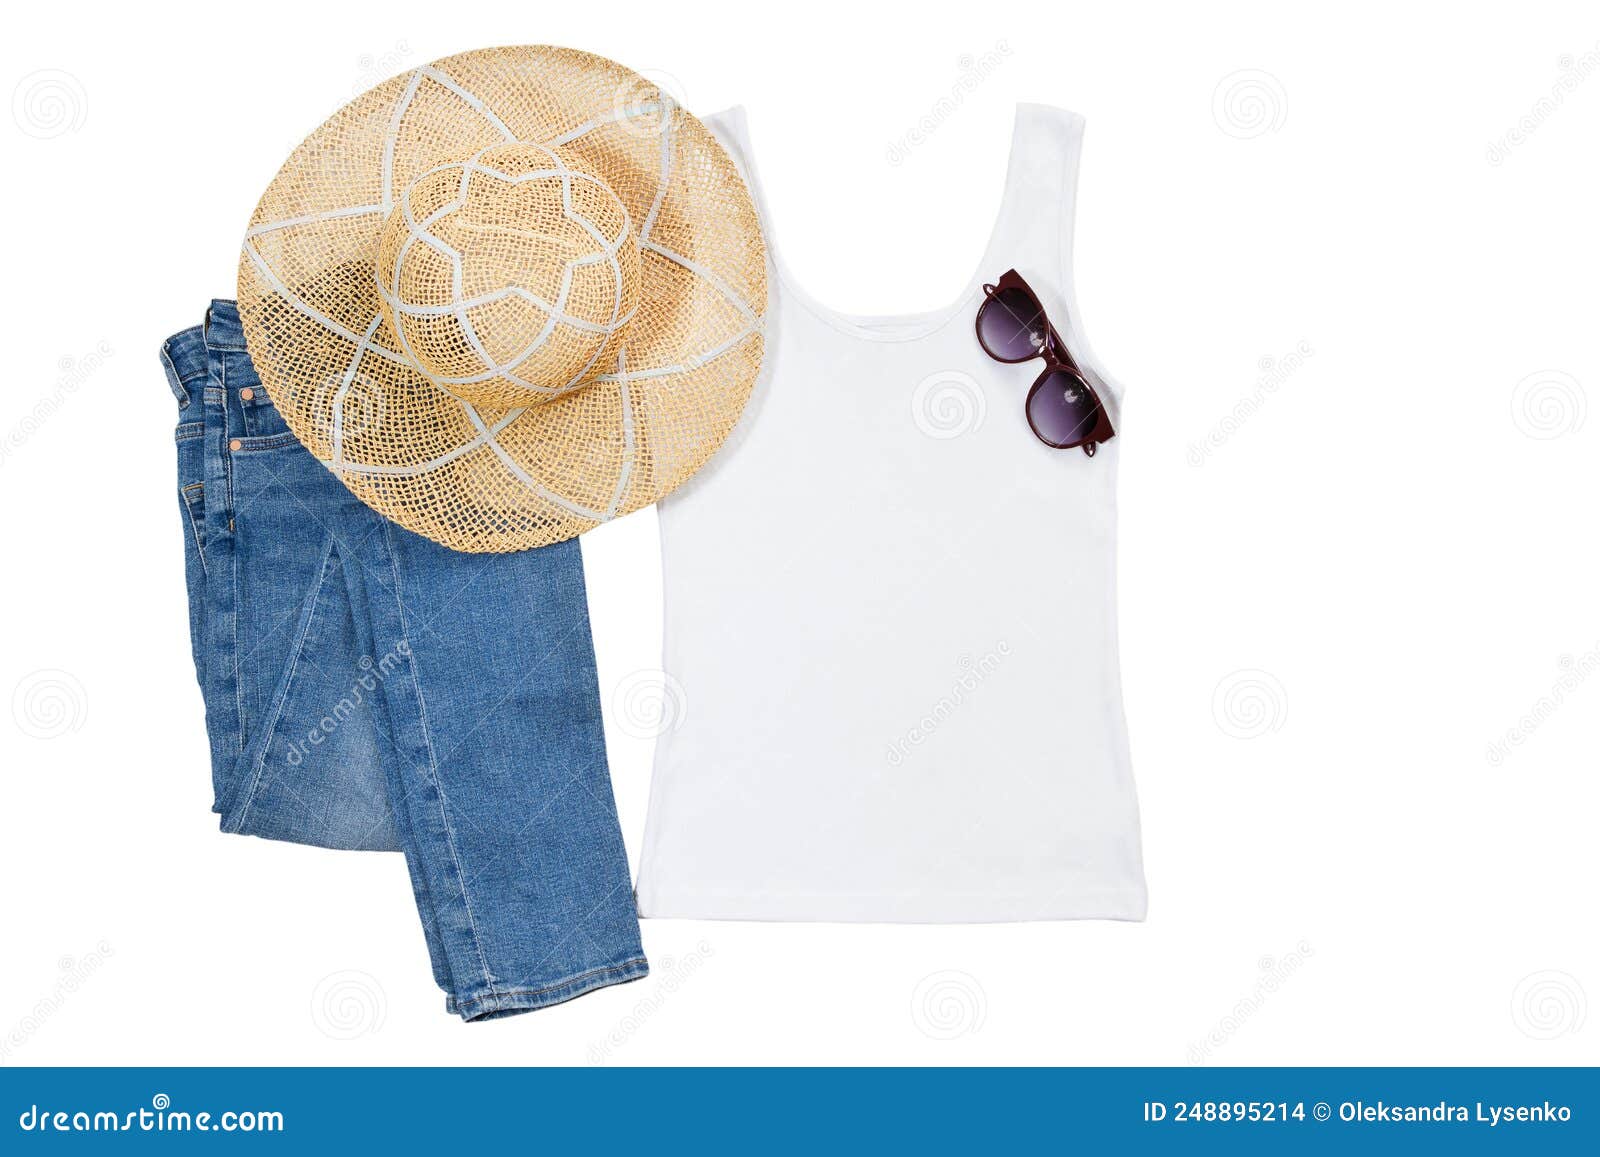 Summer Female T Shirt, Hat, Sunglasses Mock Up Flat Lay Isolated on ...